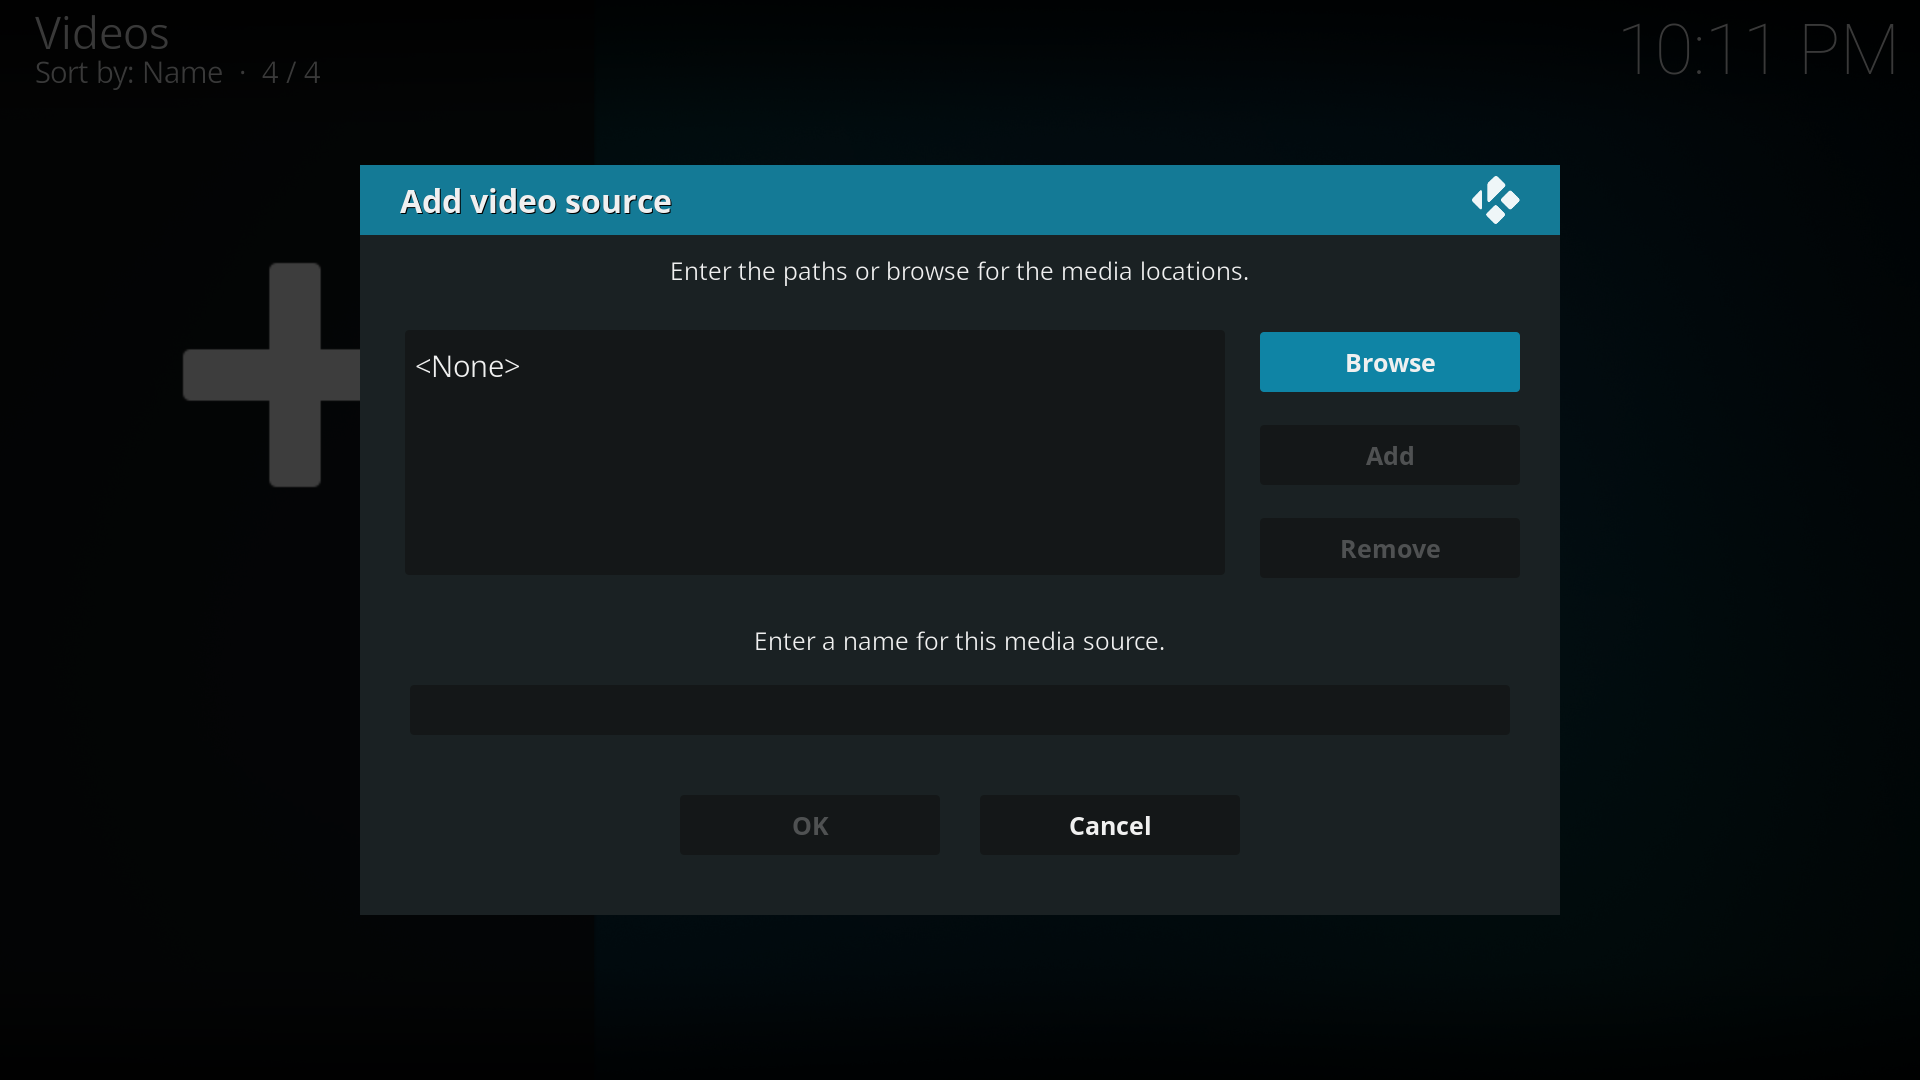 Step 3: The "Add Video Source" screen will be displayed. Then select the "Browse" button.